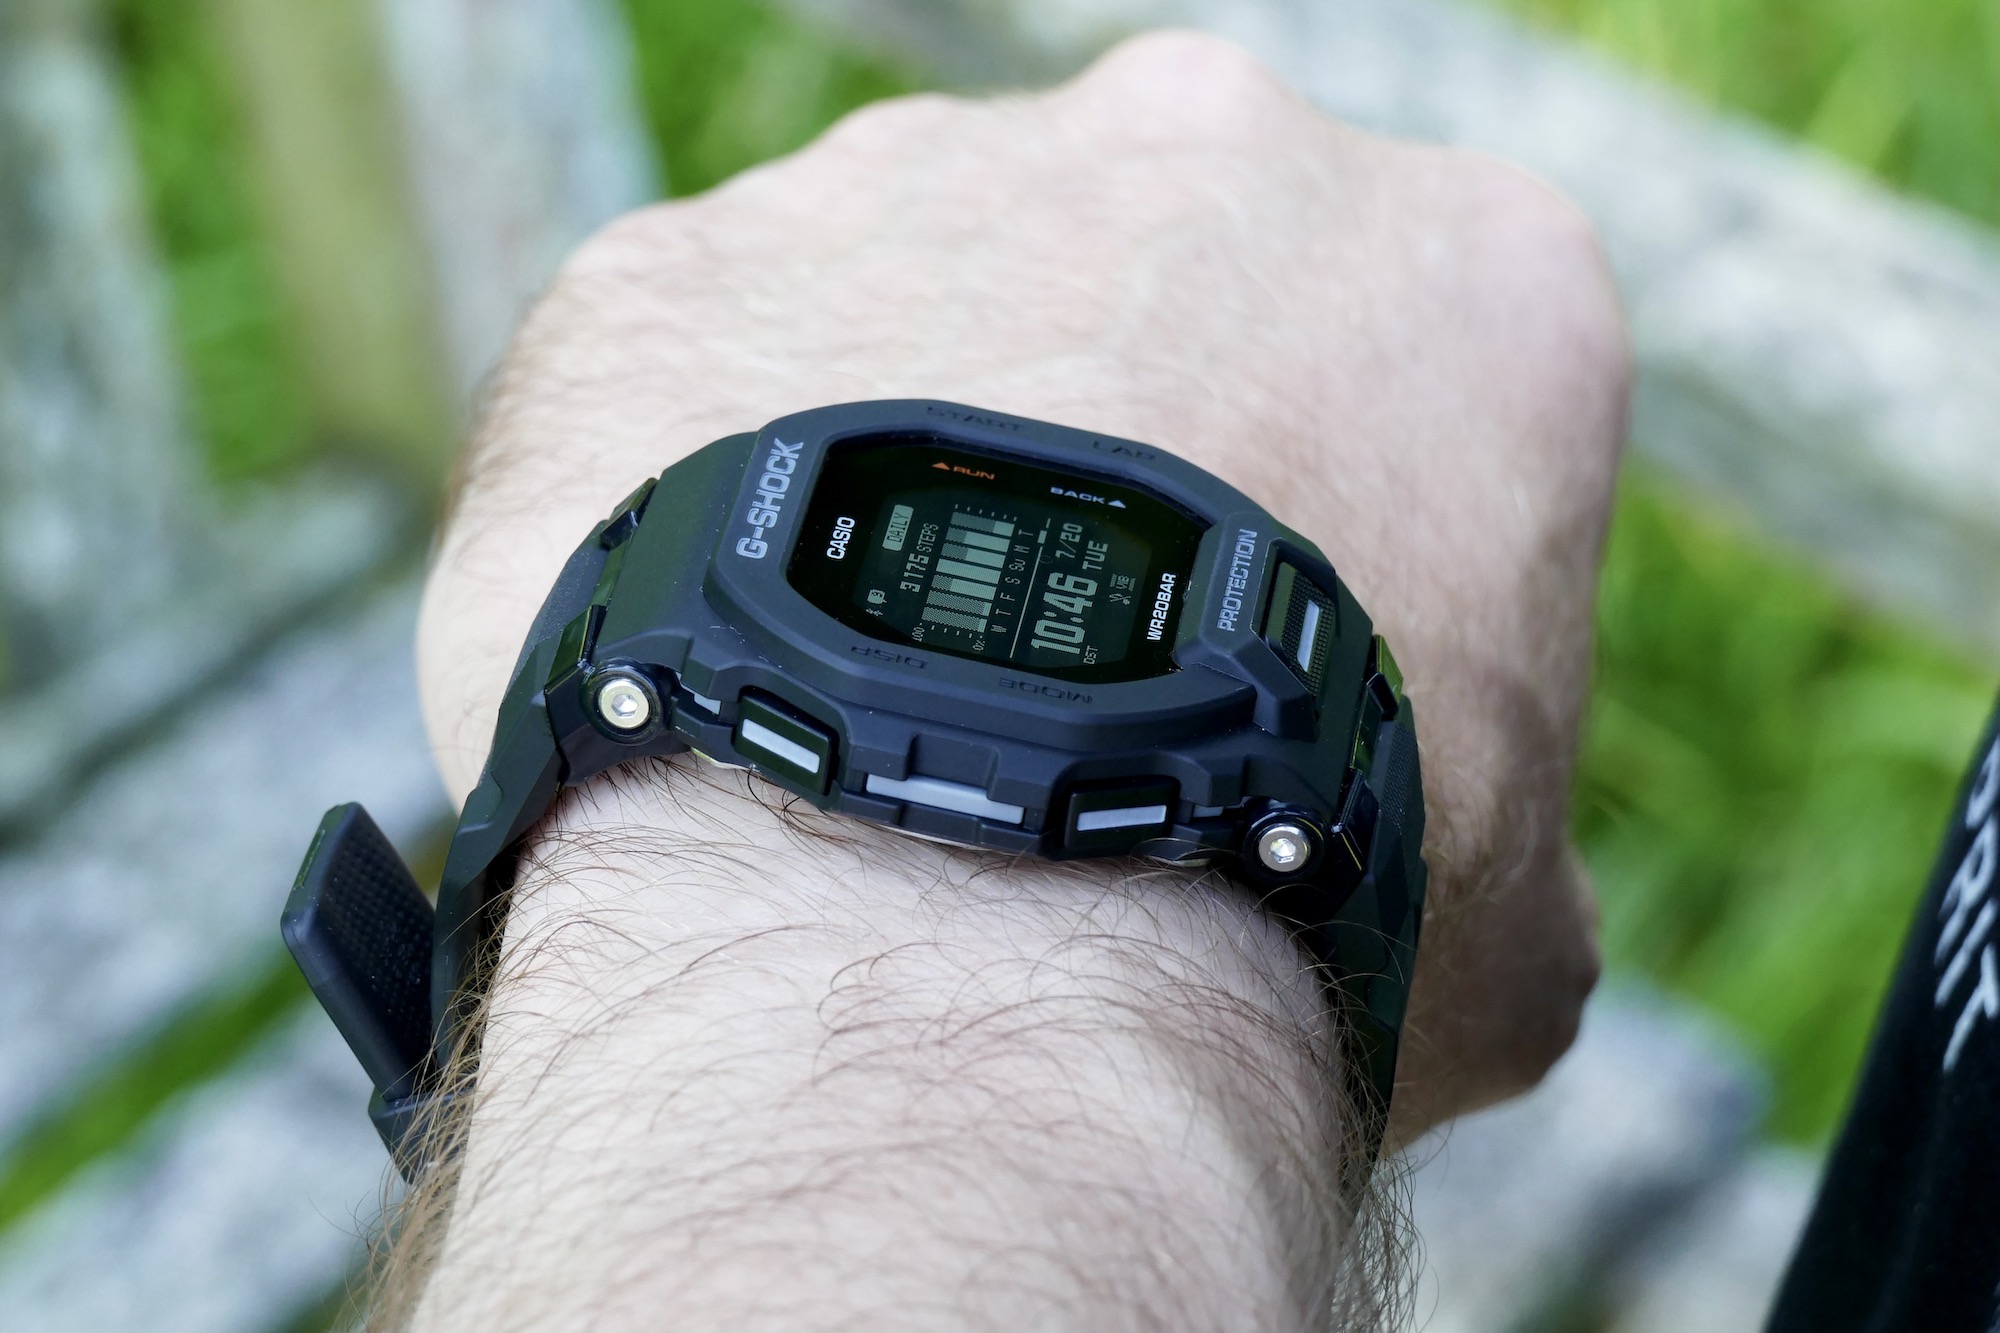 Casio G-Shock GBD-200 | Review: Trends Digital Perfectly Balanced